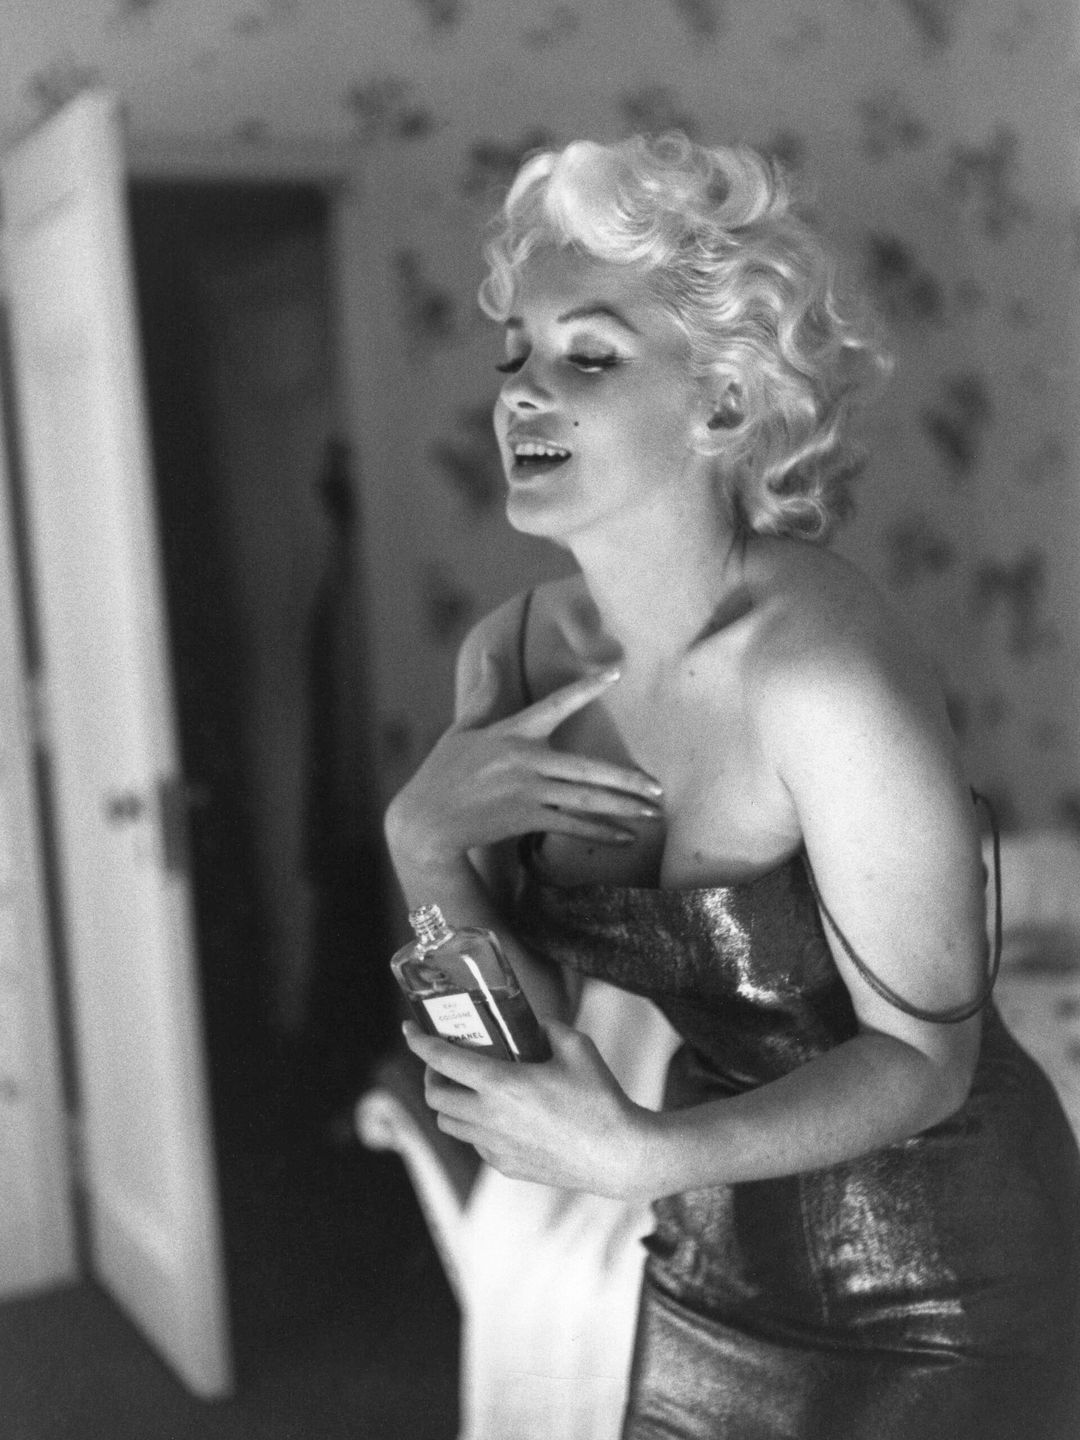 NEW YORK - MARCH 24: Actress Marilyn Monroe gets ready to go see the play "Cat On A Hot Tin Roof" playfully applying her make up and Chanel No. 5 Perfume on March 24, 1955 at the Ambassador Hotel in New York City, New York. (Photo by Ed Feingersh/Michael 